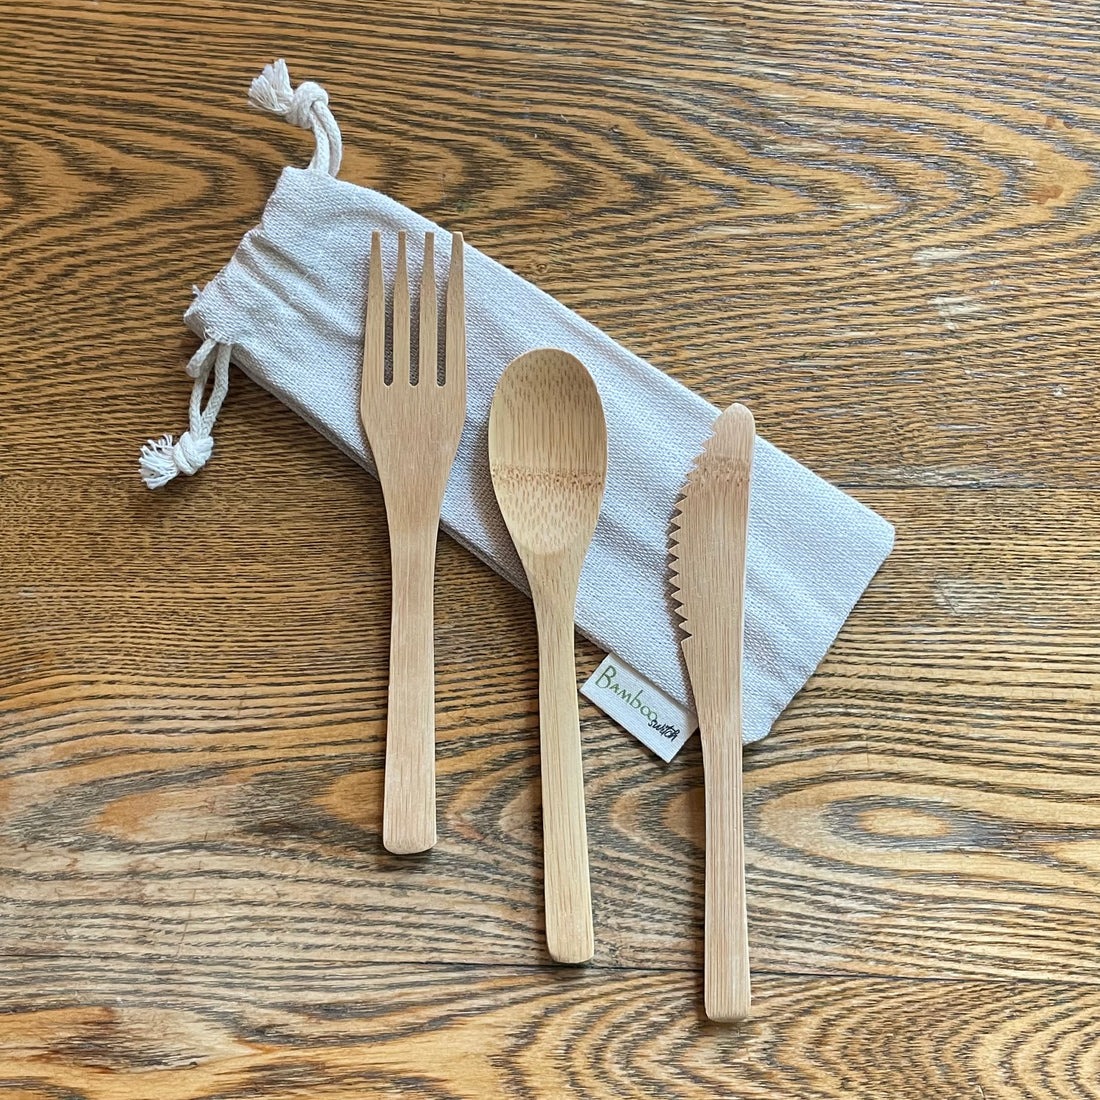 Bamboo Cutlery Sets for Kids